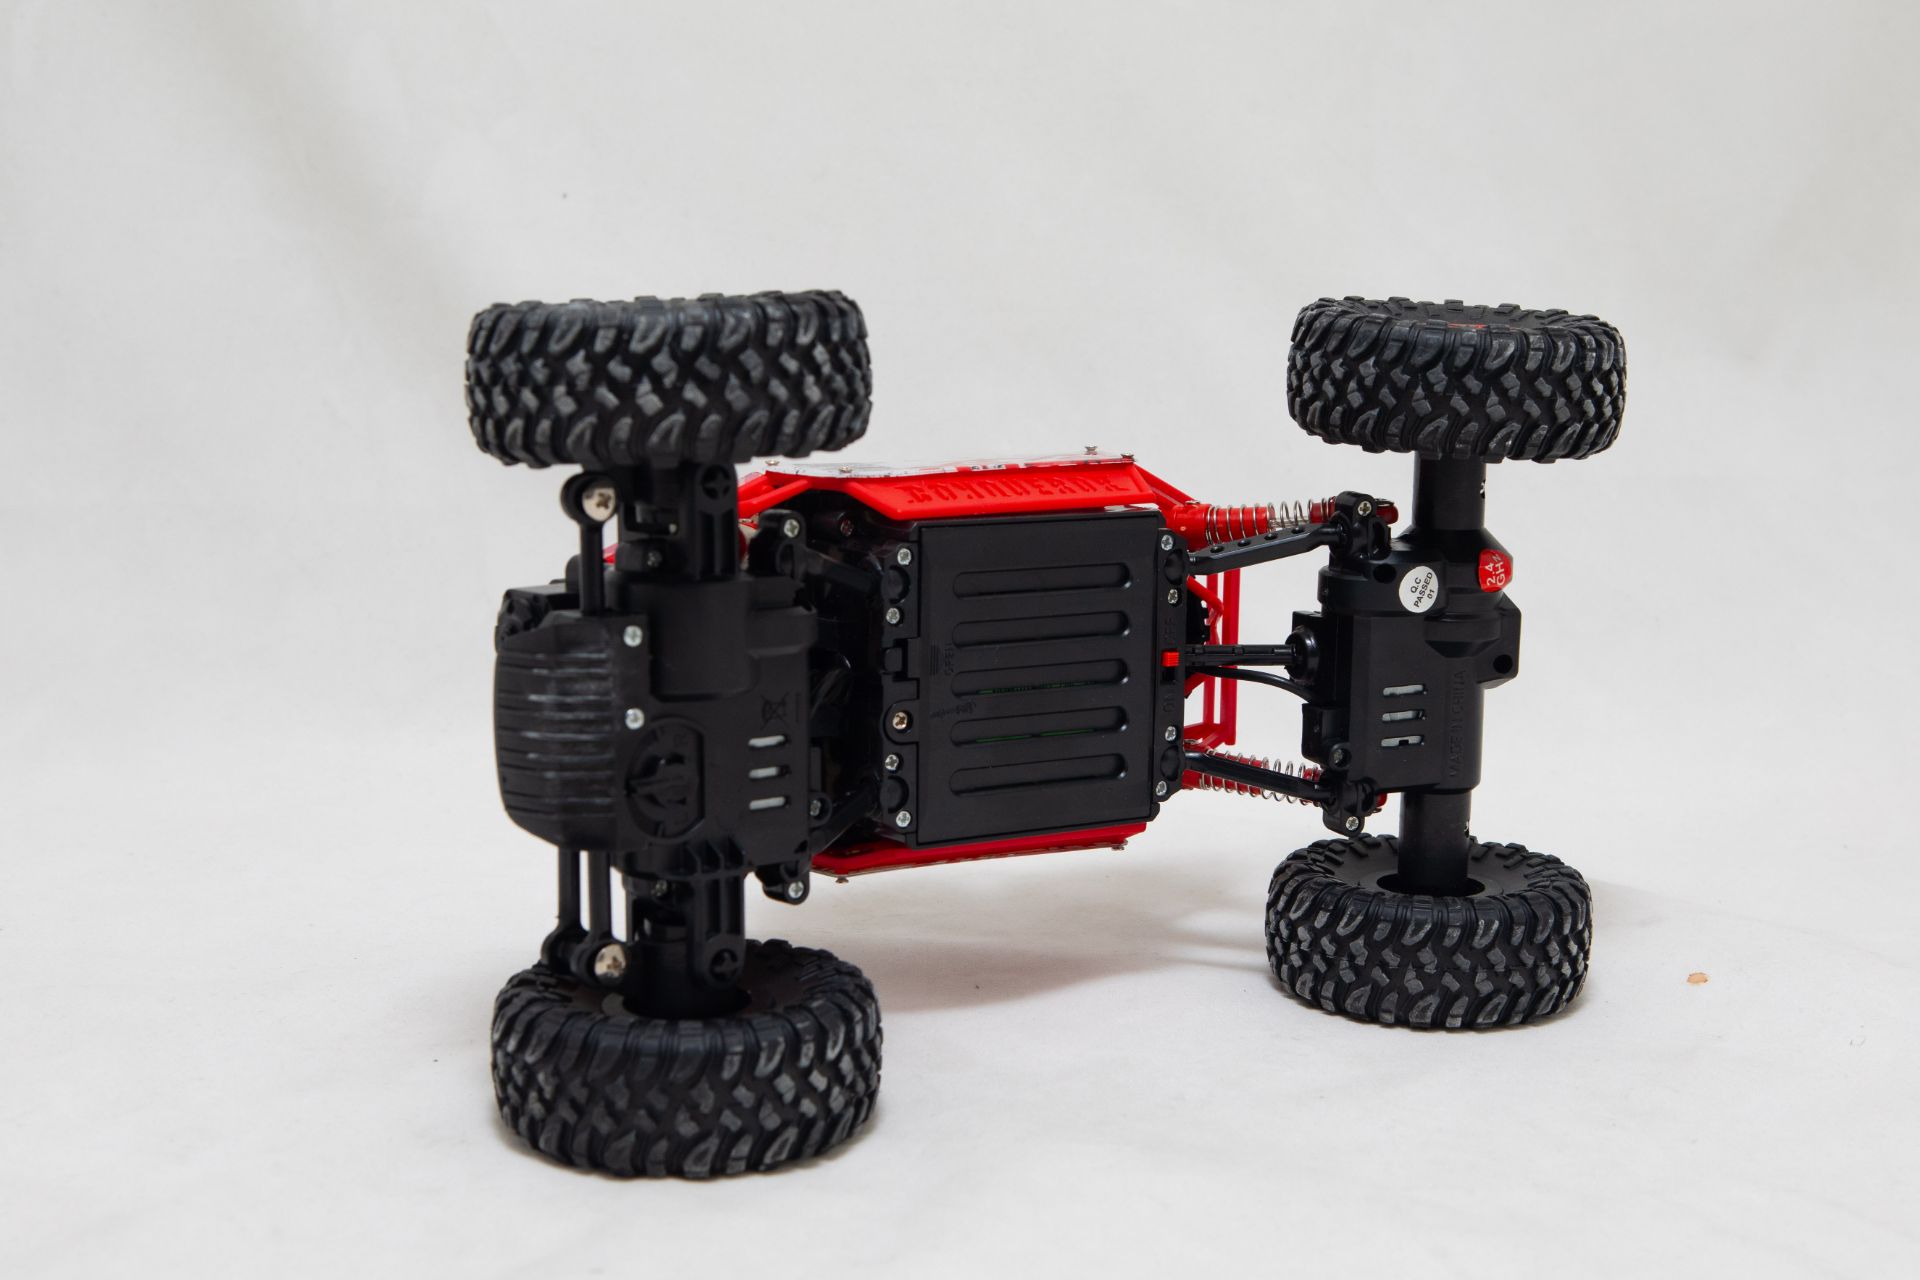 36 X ROCK CRAWLER - REMOTE CONTROL OFF ROAD TRUCK - Image 8 of 9